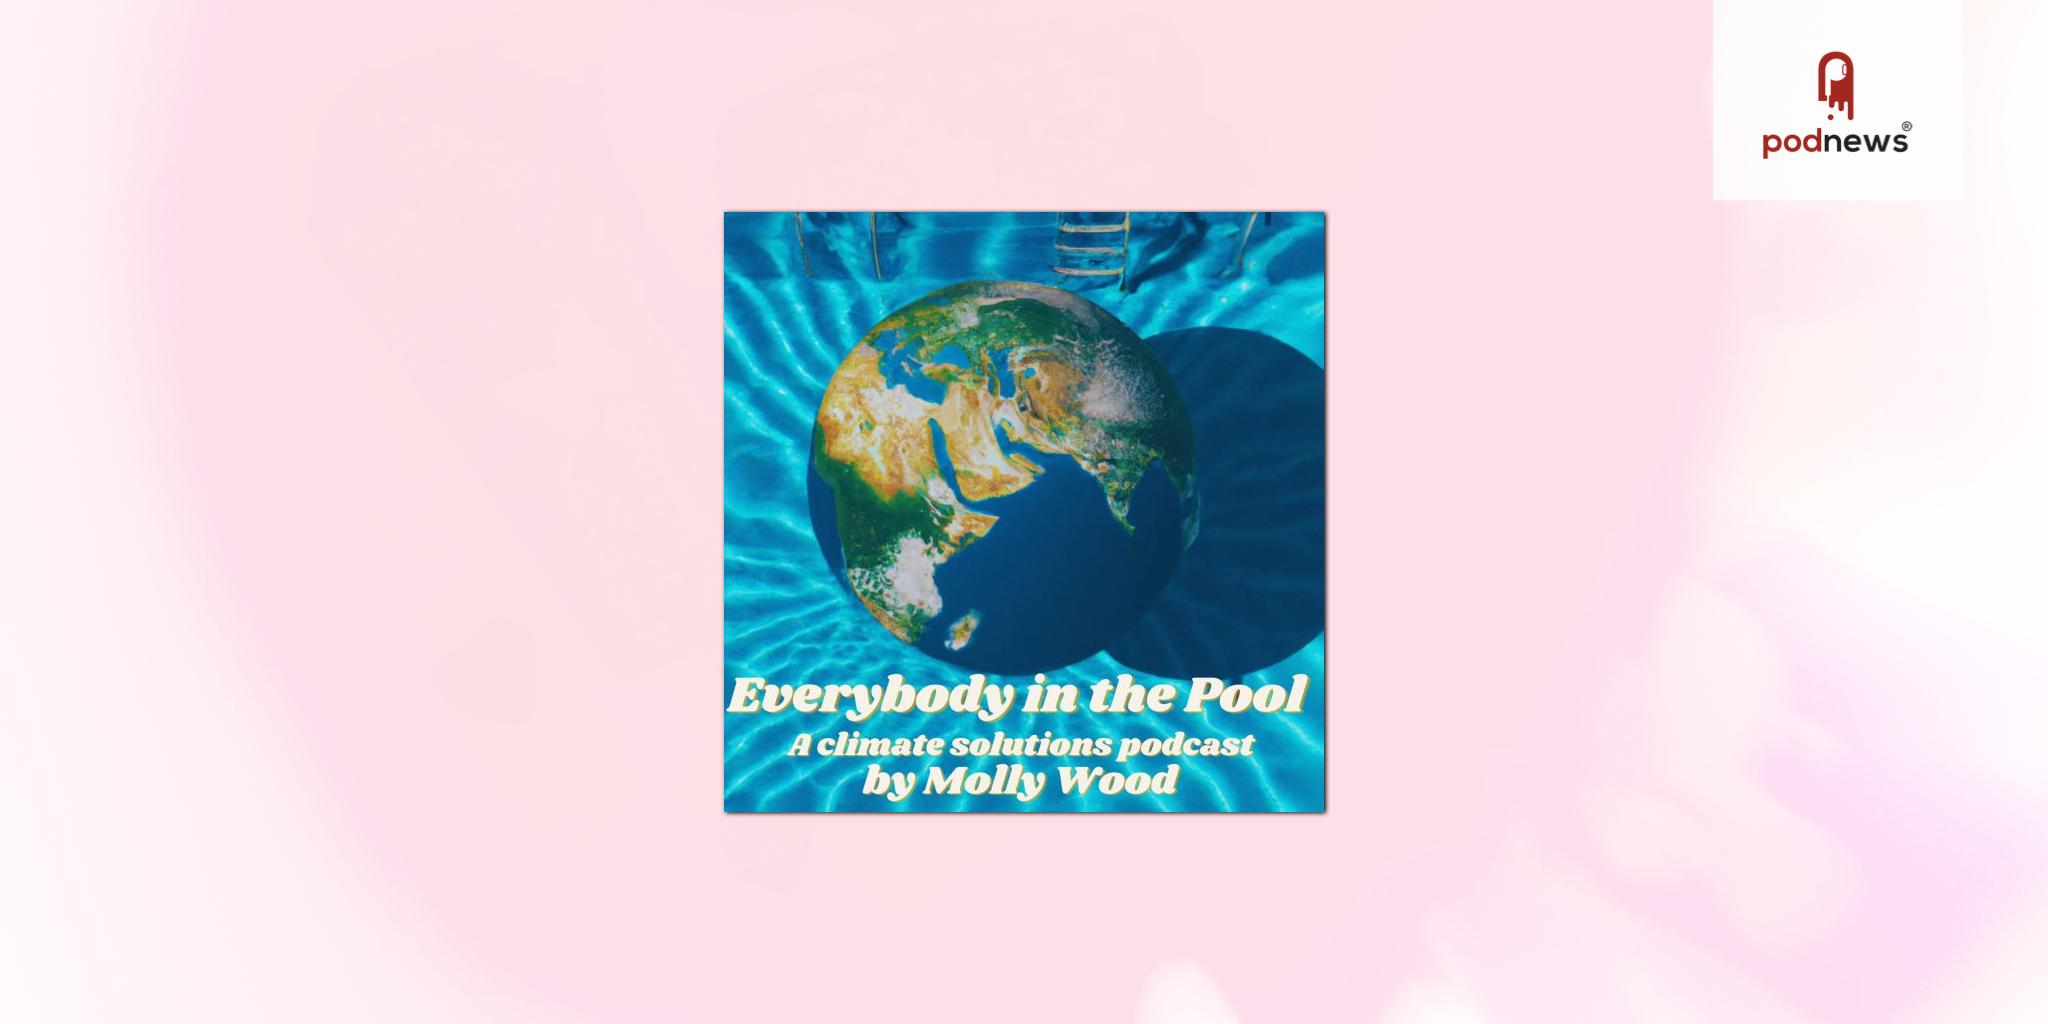 Molly Wood Launches Climate Solutions Podcast Everybody in the Pool